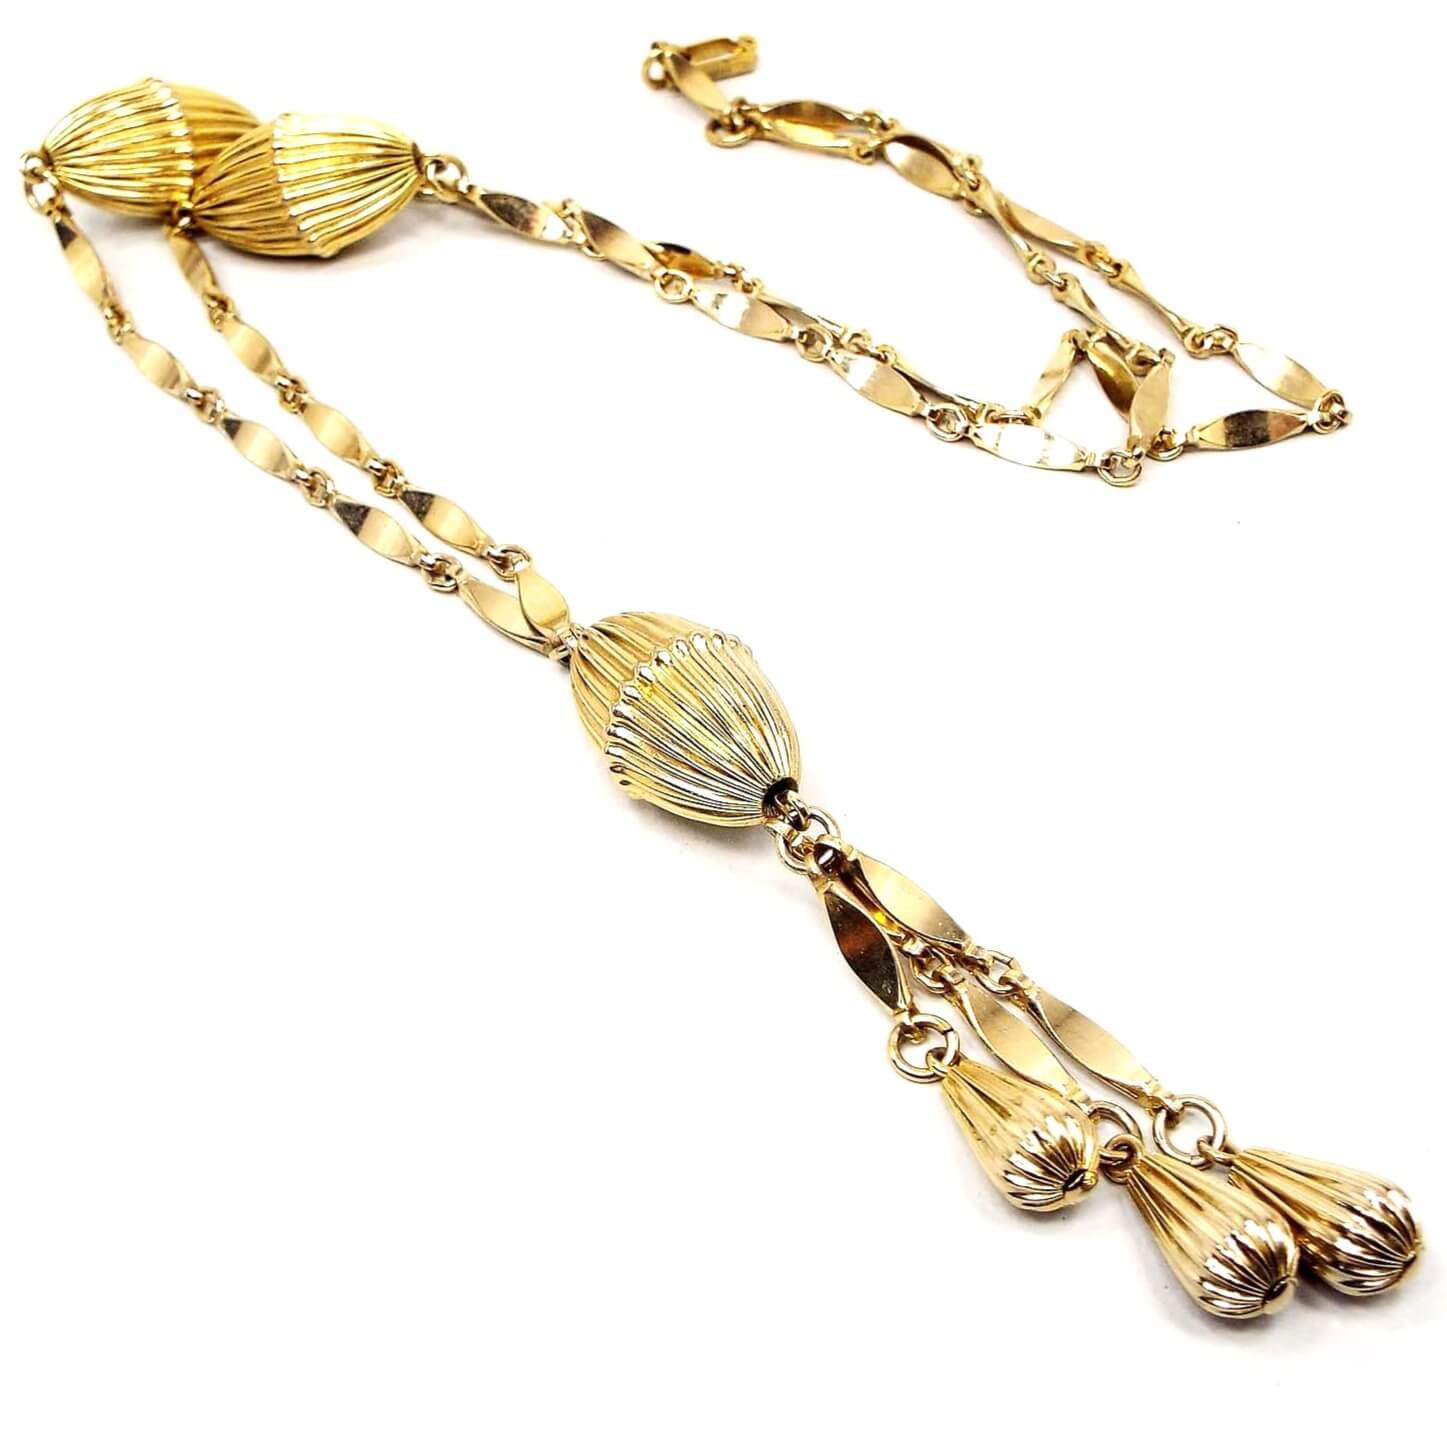 Angled view of the Mid Century vintage tassel necklace. The metal is gold tone in color. There are marquis shaped links down to two large oval corrugated beads and then more links to the bottom tassel. The tassel area has one large oval corrugated bead and then three strands of marquis link chain down to smaller sized corrugated teardrop shaped beads at the bottom.